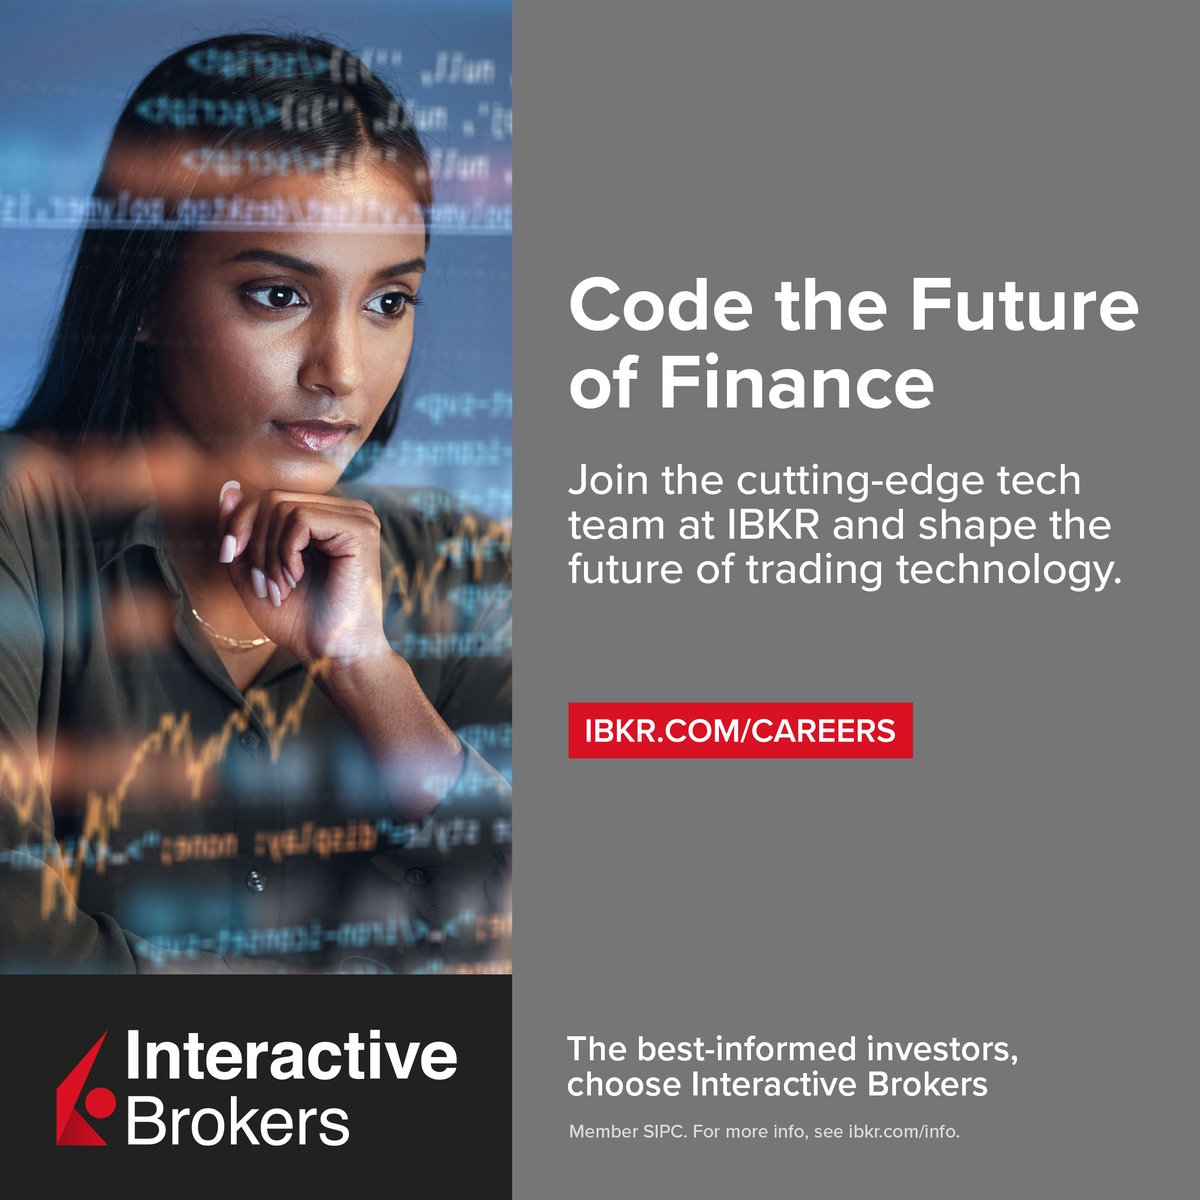 Looking for a #career that offers diversity, global impact, and cutting-edge technology? Choose #InteractiveBrokers and code the future: spr.ly/careerst